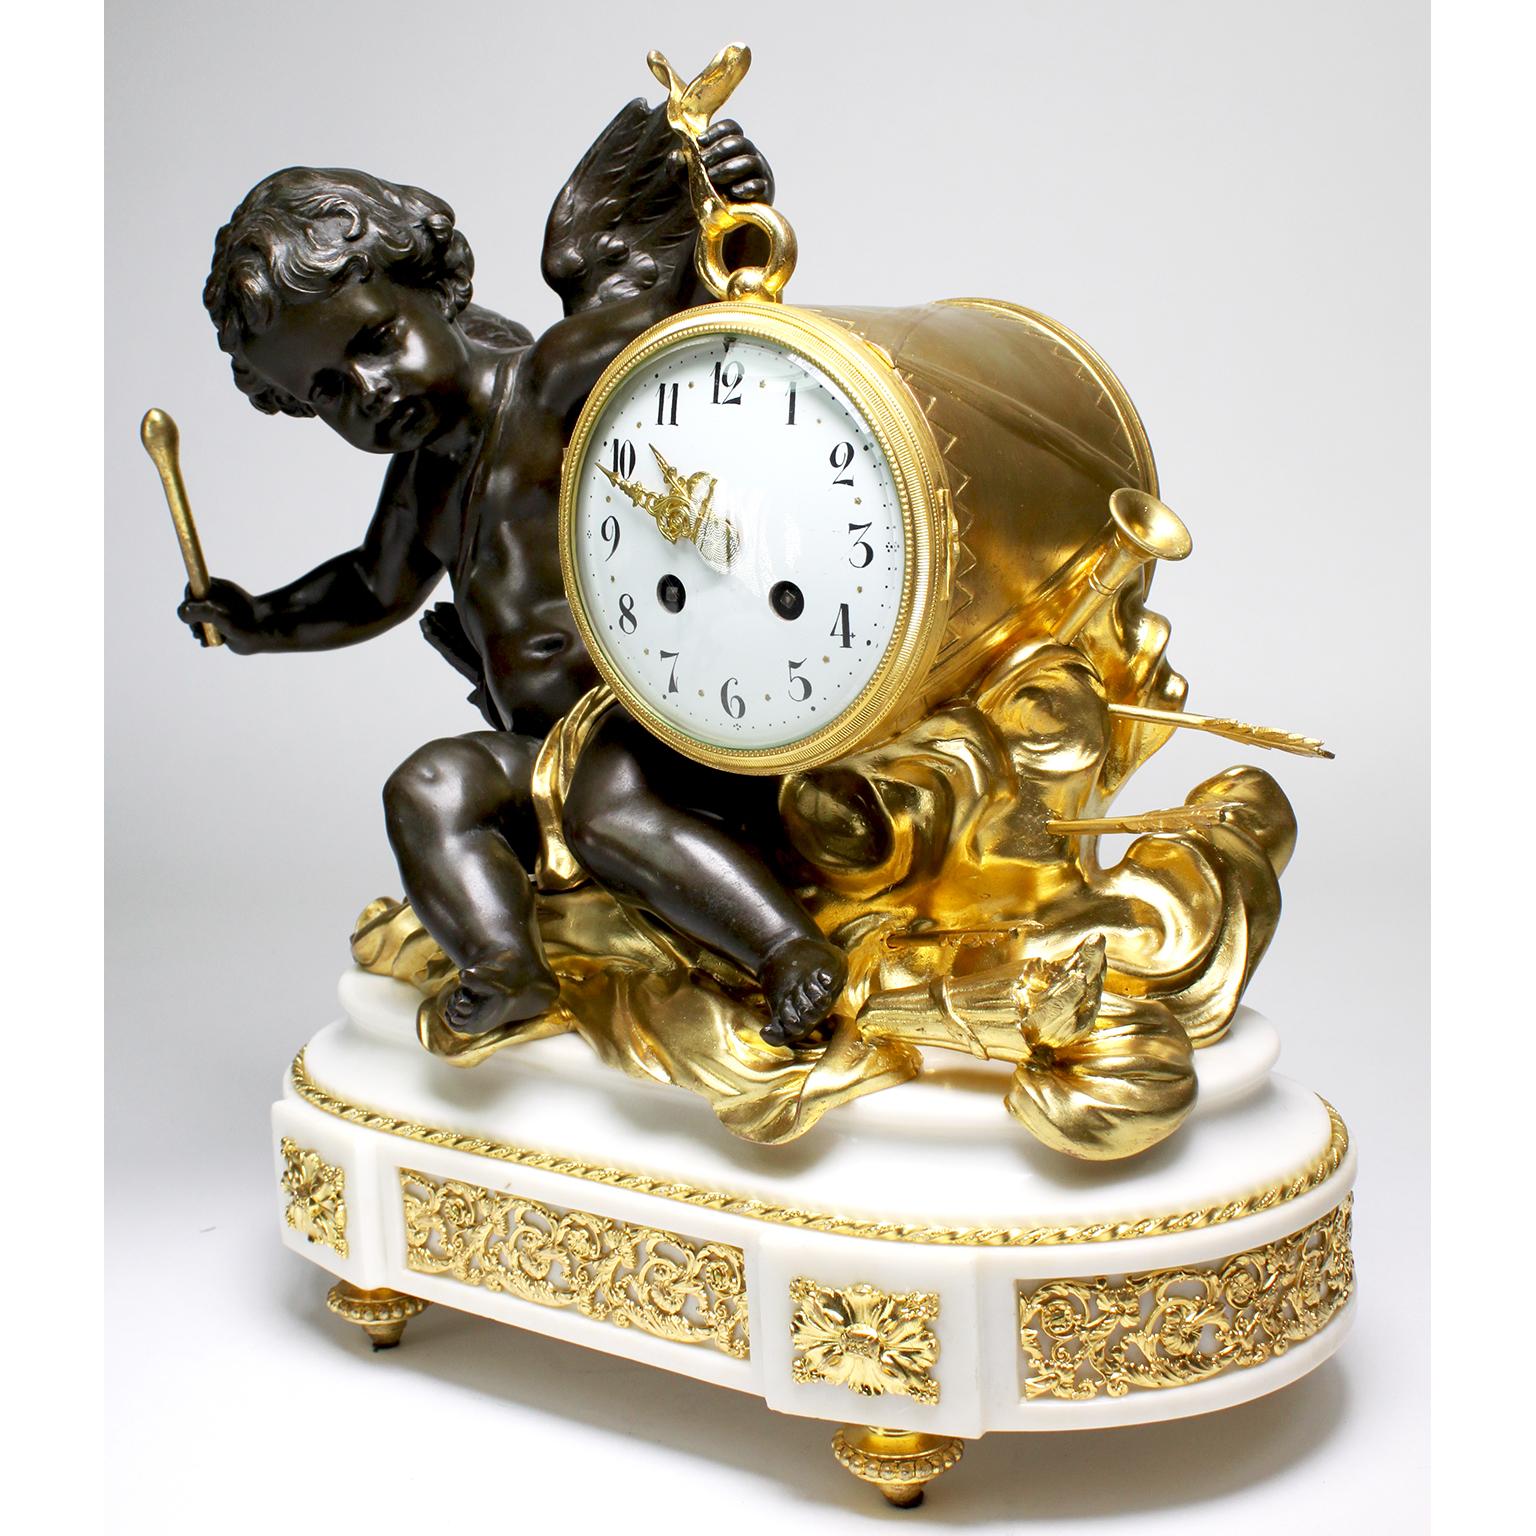 A fine French Louis XVI Style gilt and patinated bronze and white marble figural mantel clock with a figure of a drummer cherub. The brown patina cupid, seated on gilt-bronze clouds with arrows, flutes and a flaming torch, holding the drum-clock and